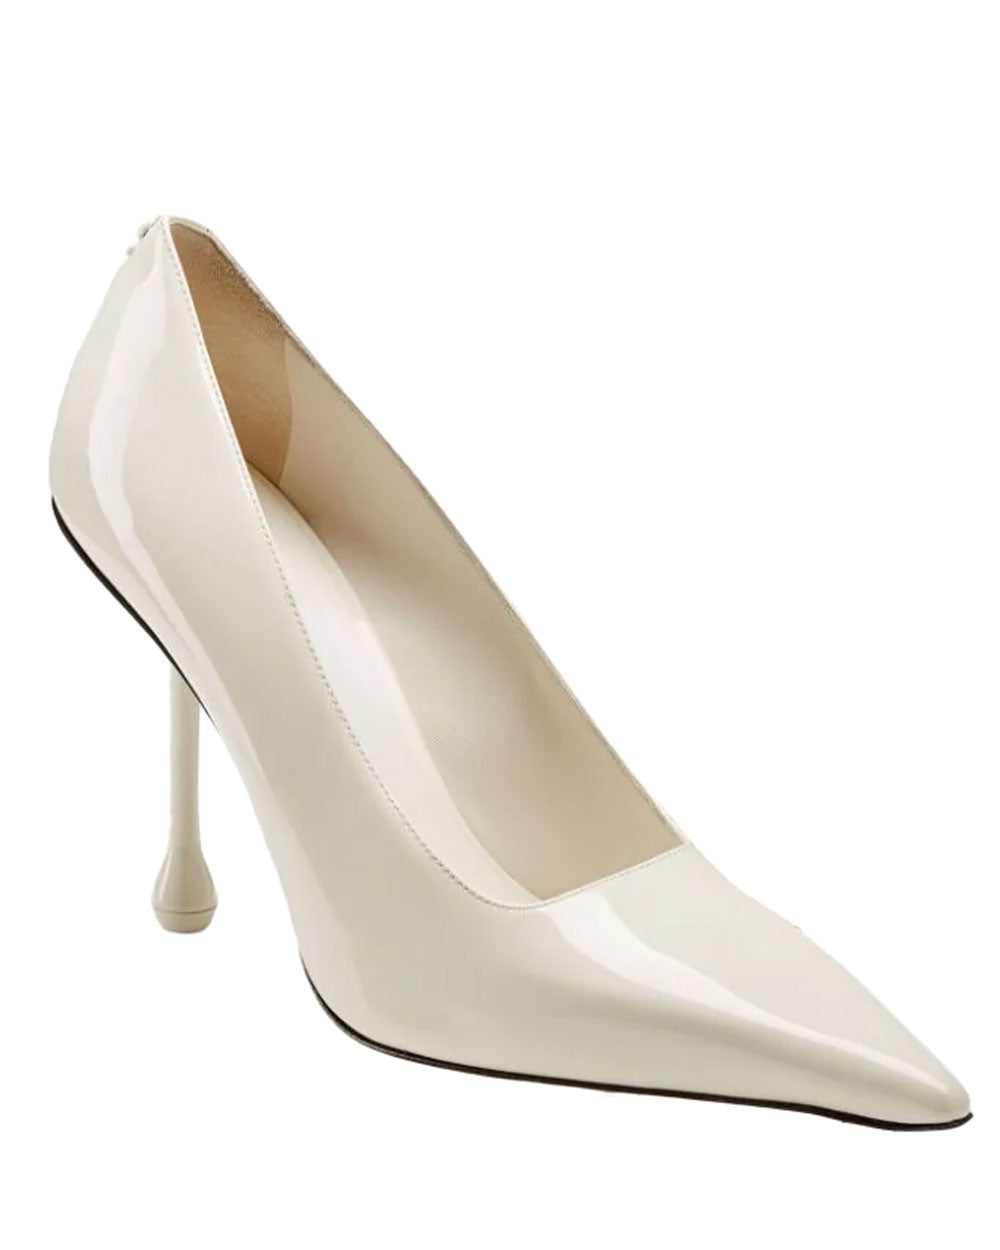 Ixia Patent Leather Pump in Latte